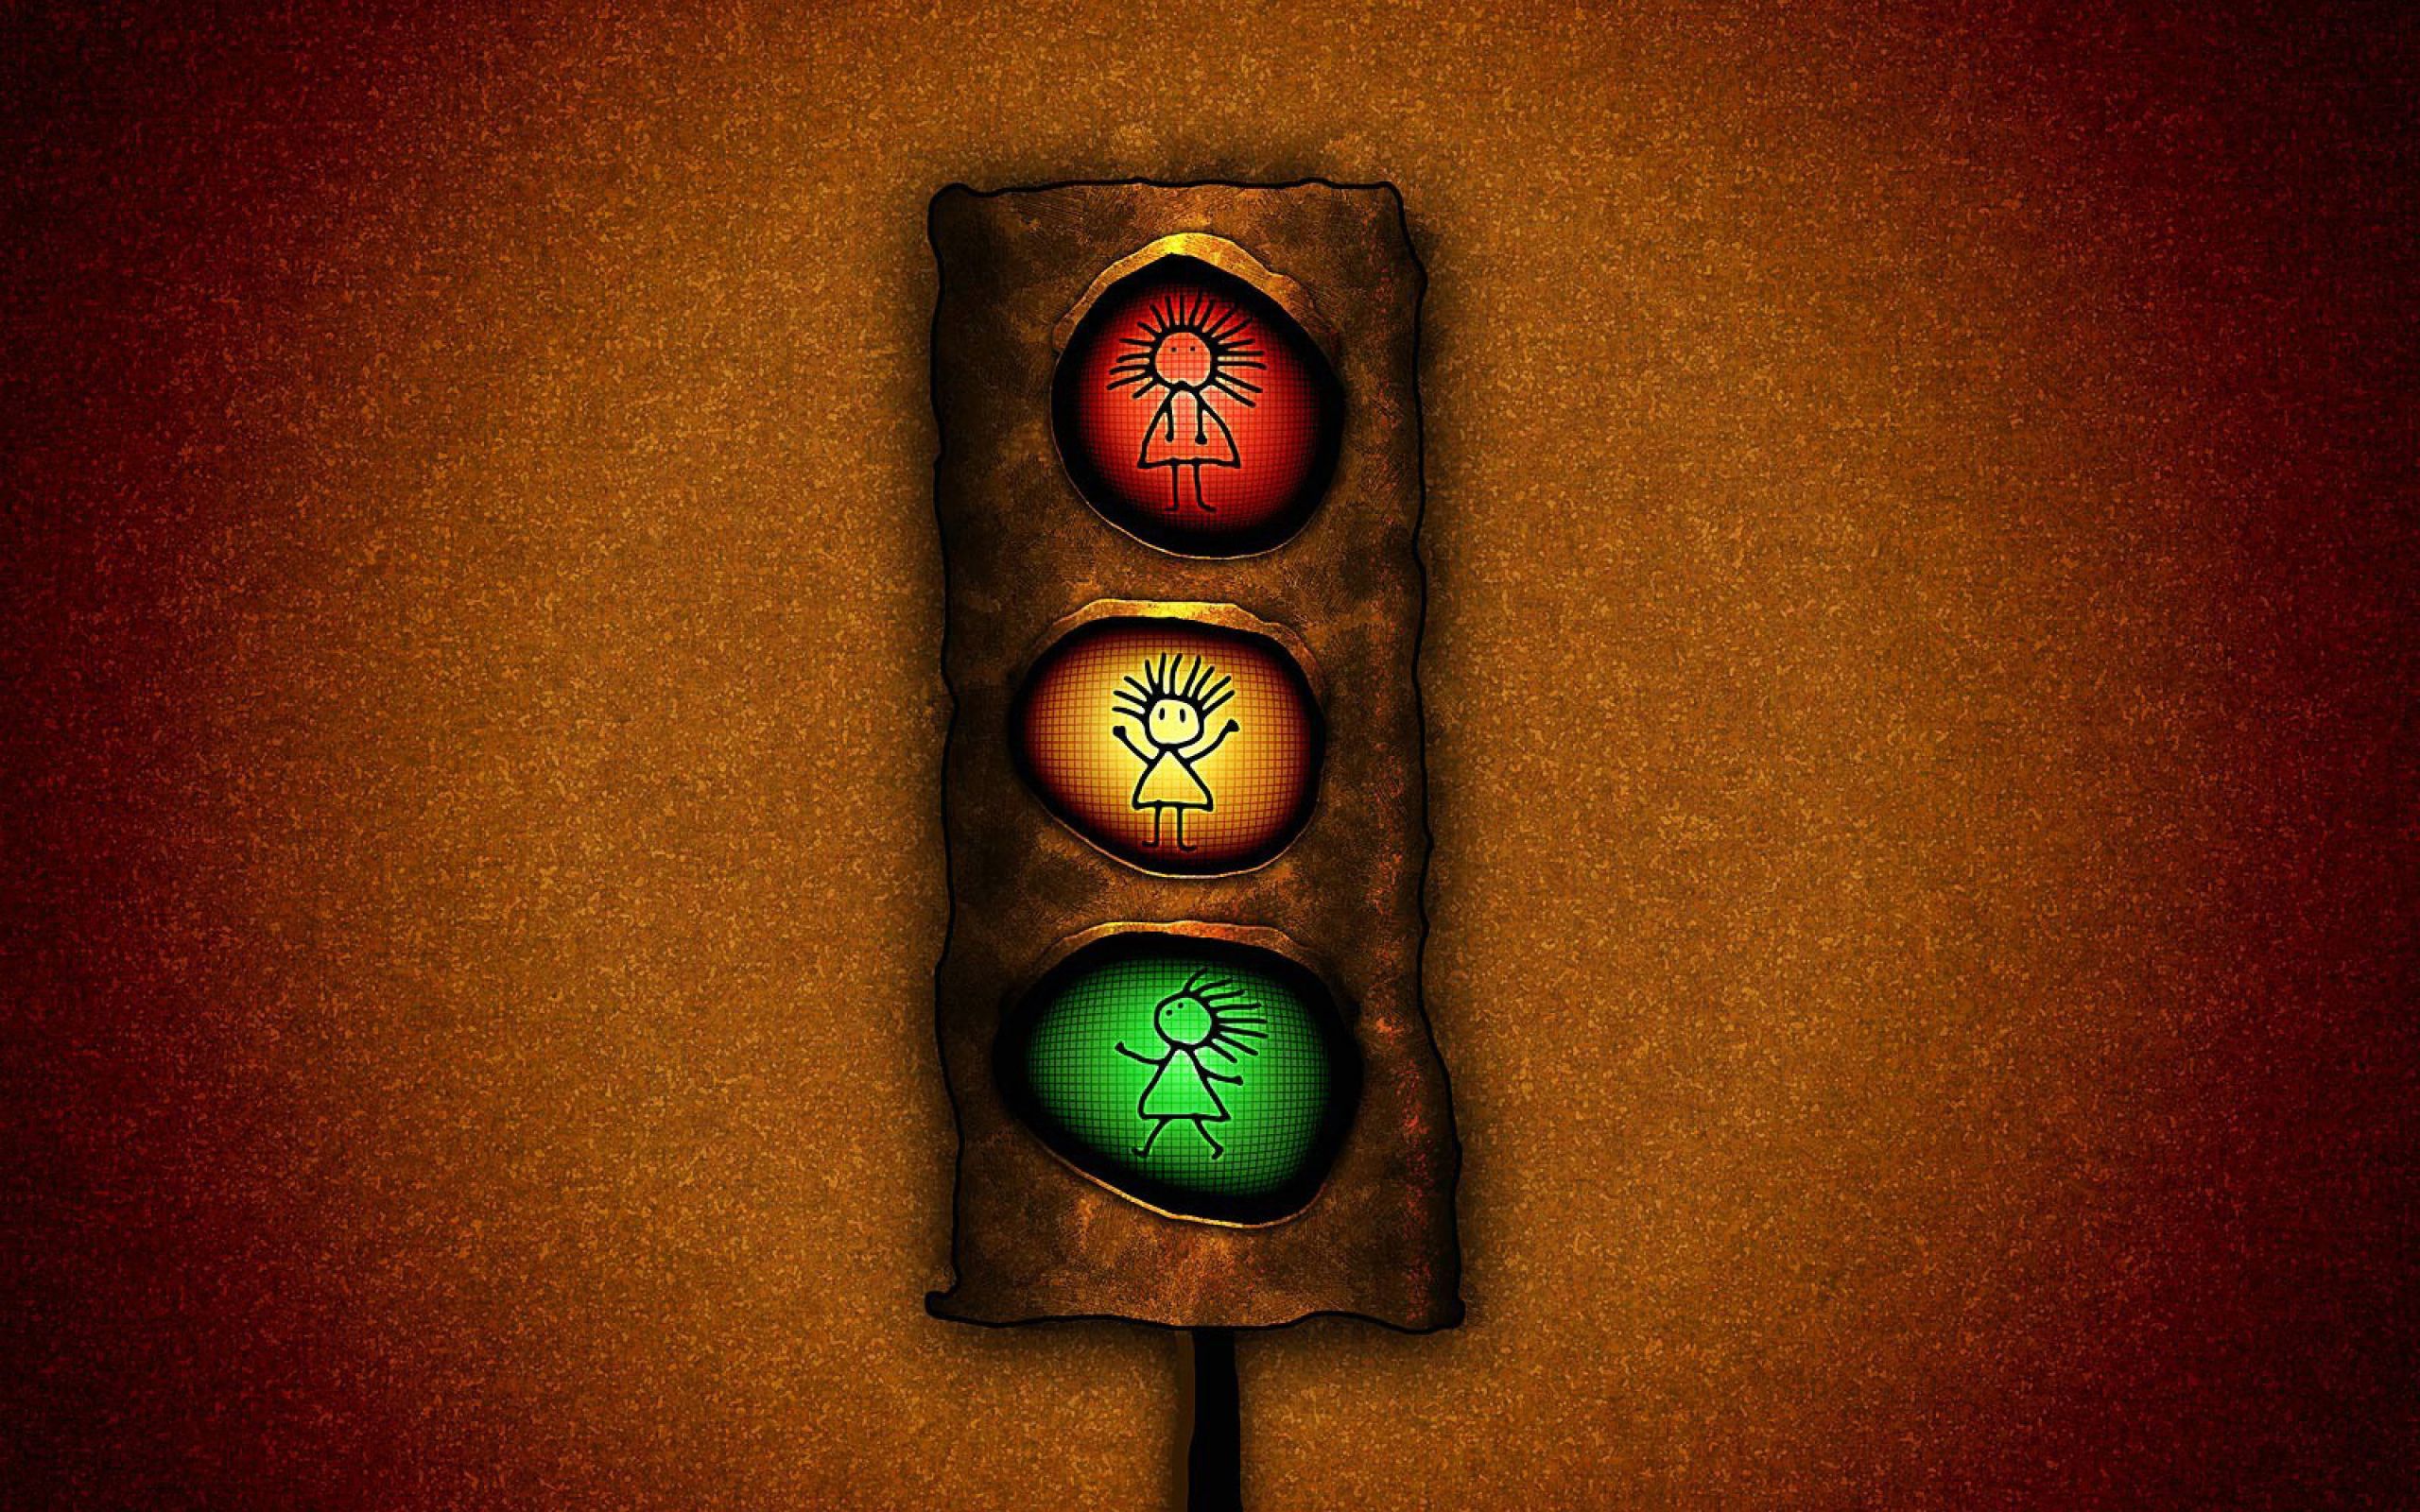 3D Funny Cartoon Road Signal Wallpaper and Abstract Wallpaper. All is Wall